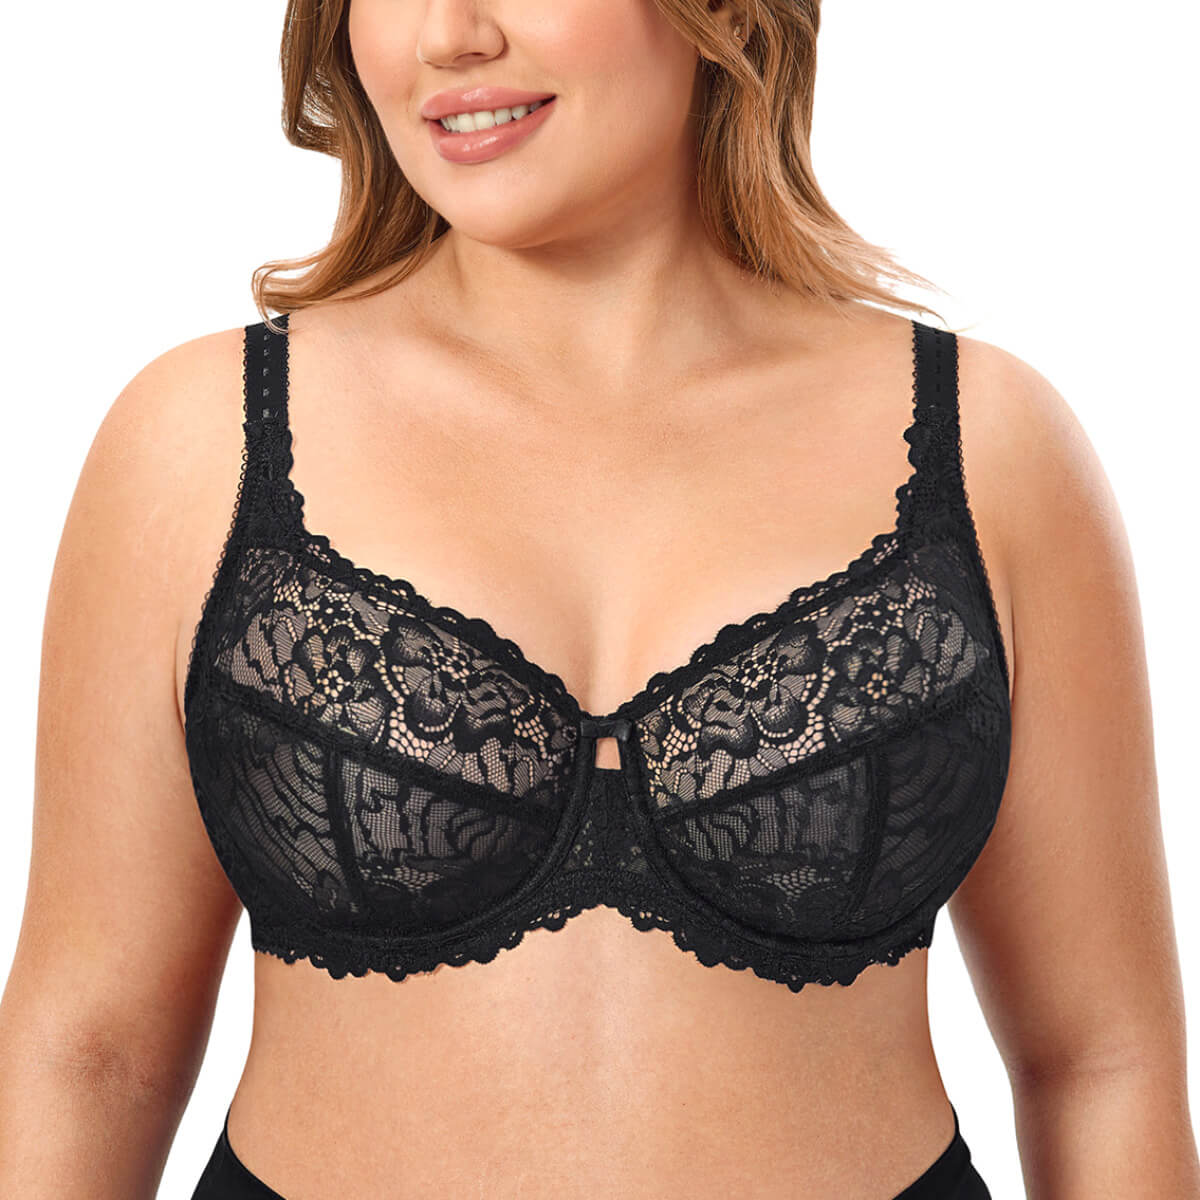 PLUS Size BH See Through Lace Womens Bras Underwire Lingerie